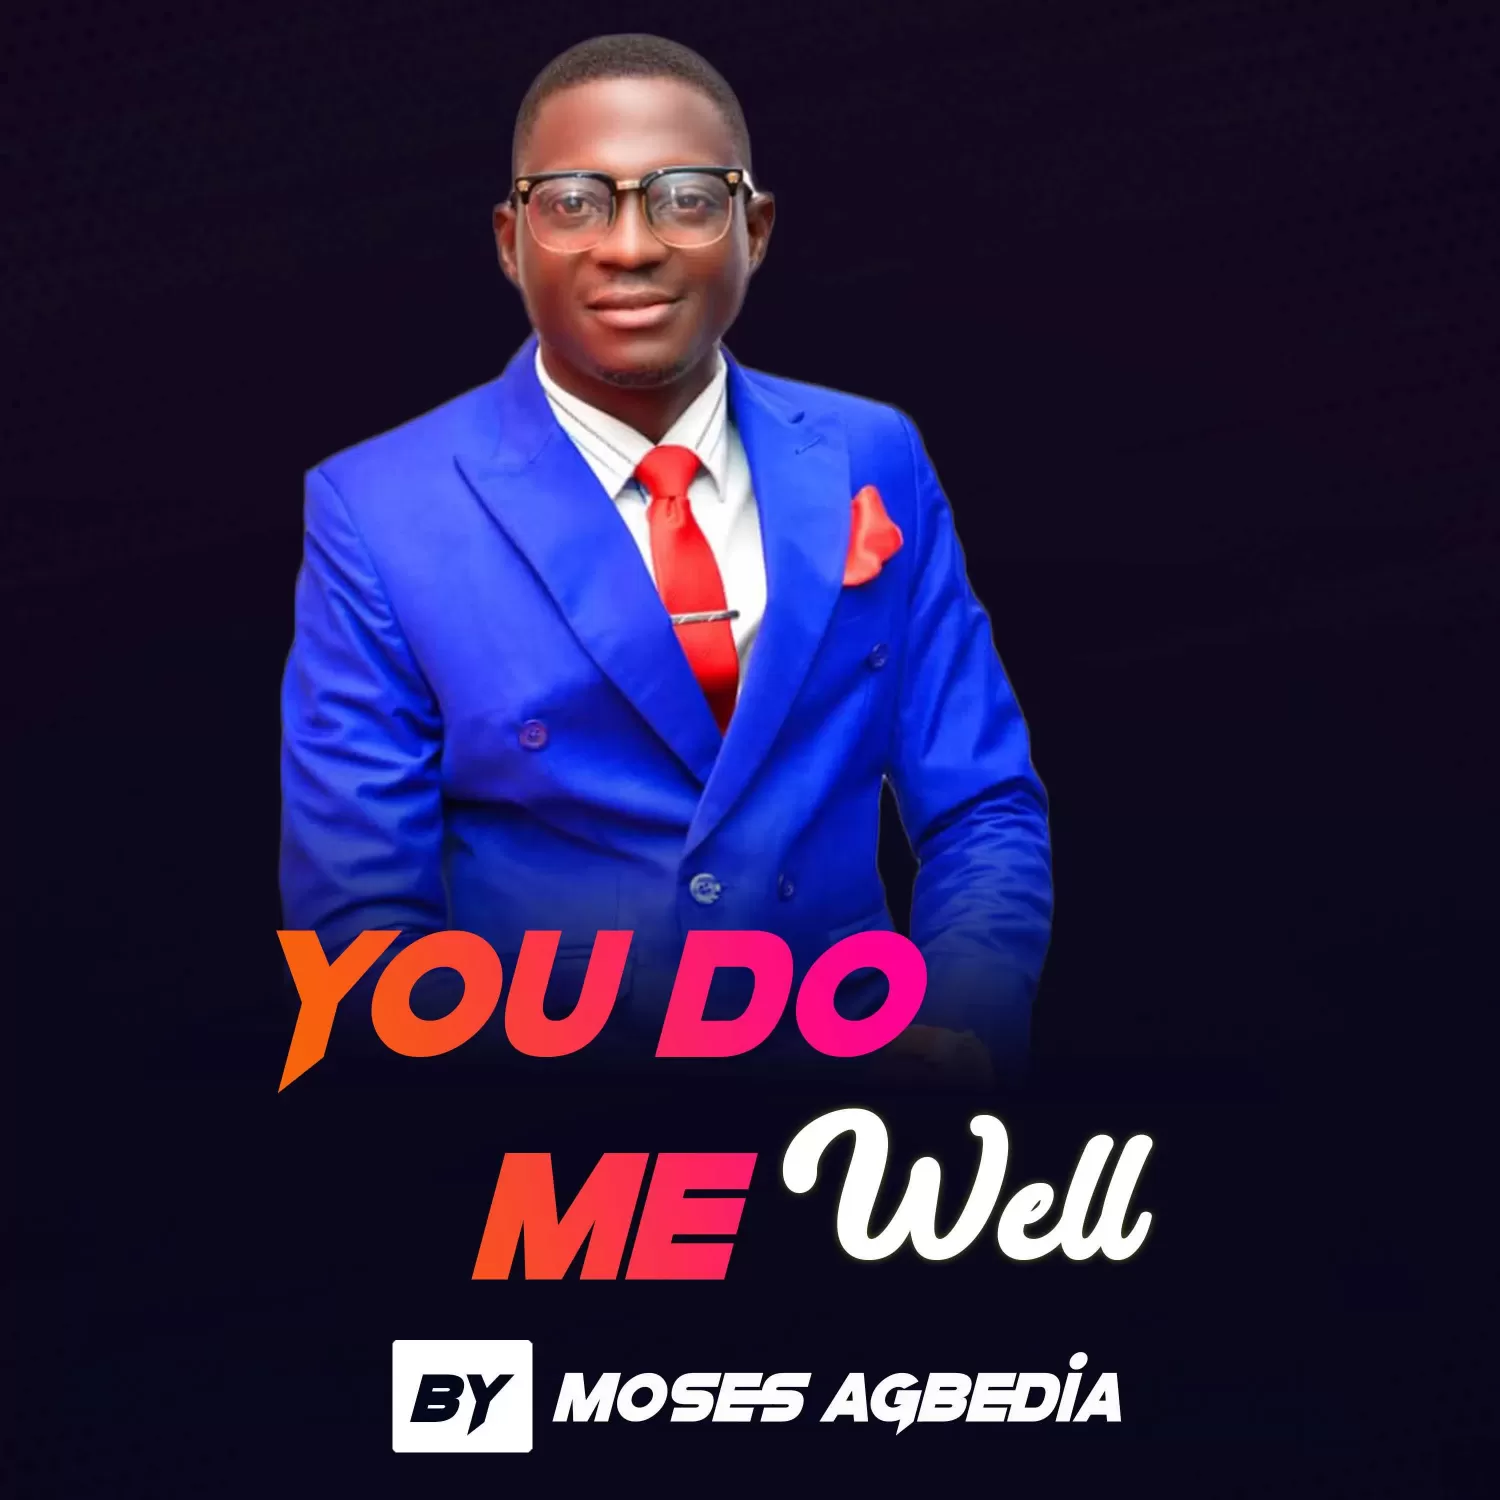 You do me well by Moses Agbedia